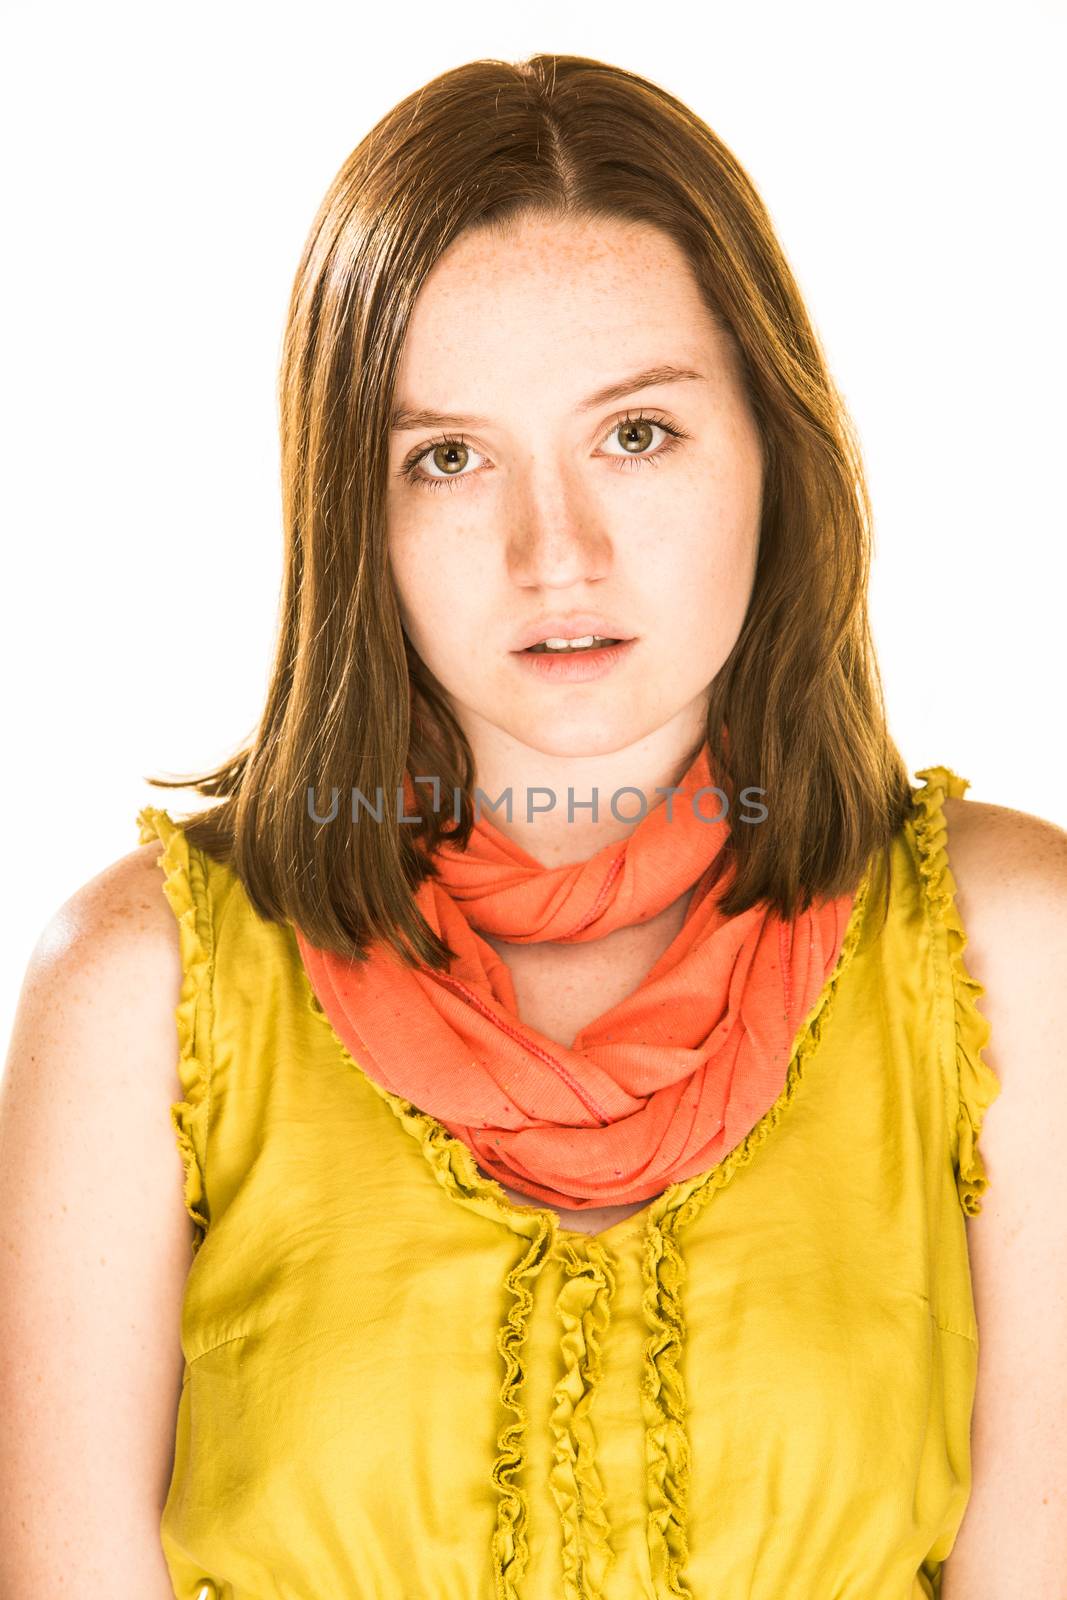 Pretty girl with an upset expression on white background